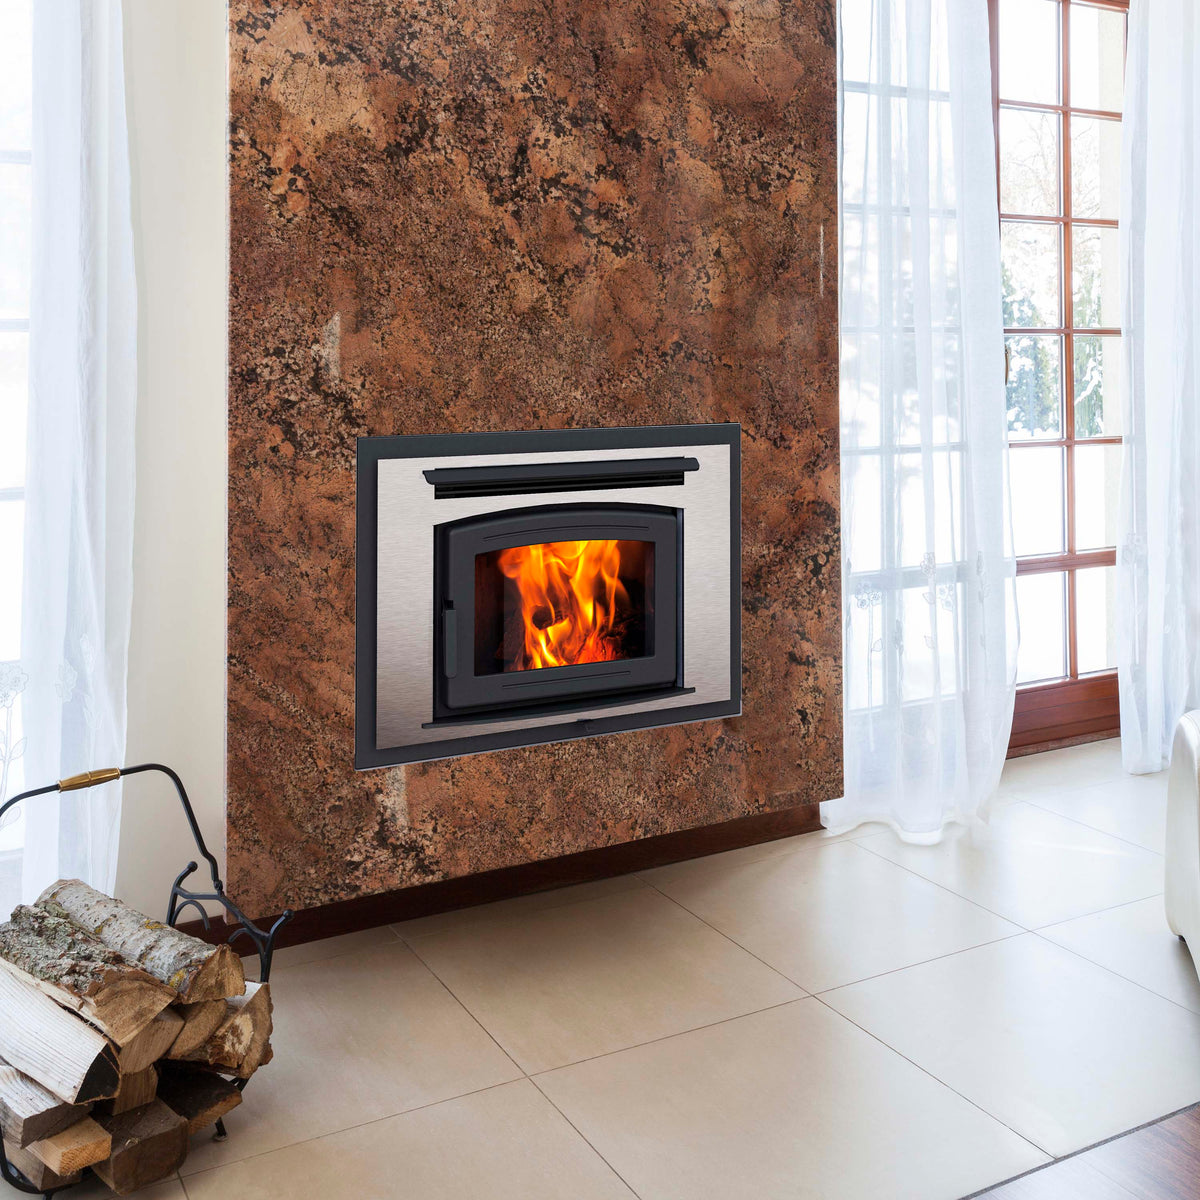 Pacific Energy FP25 Arch LE Wood Burning Fireplace - Zero-Clearance